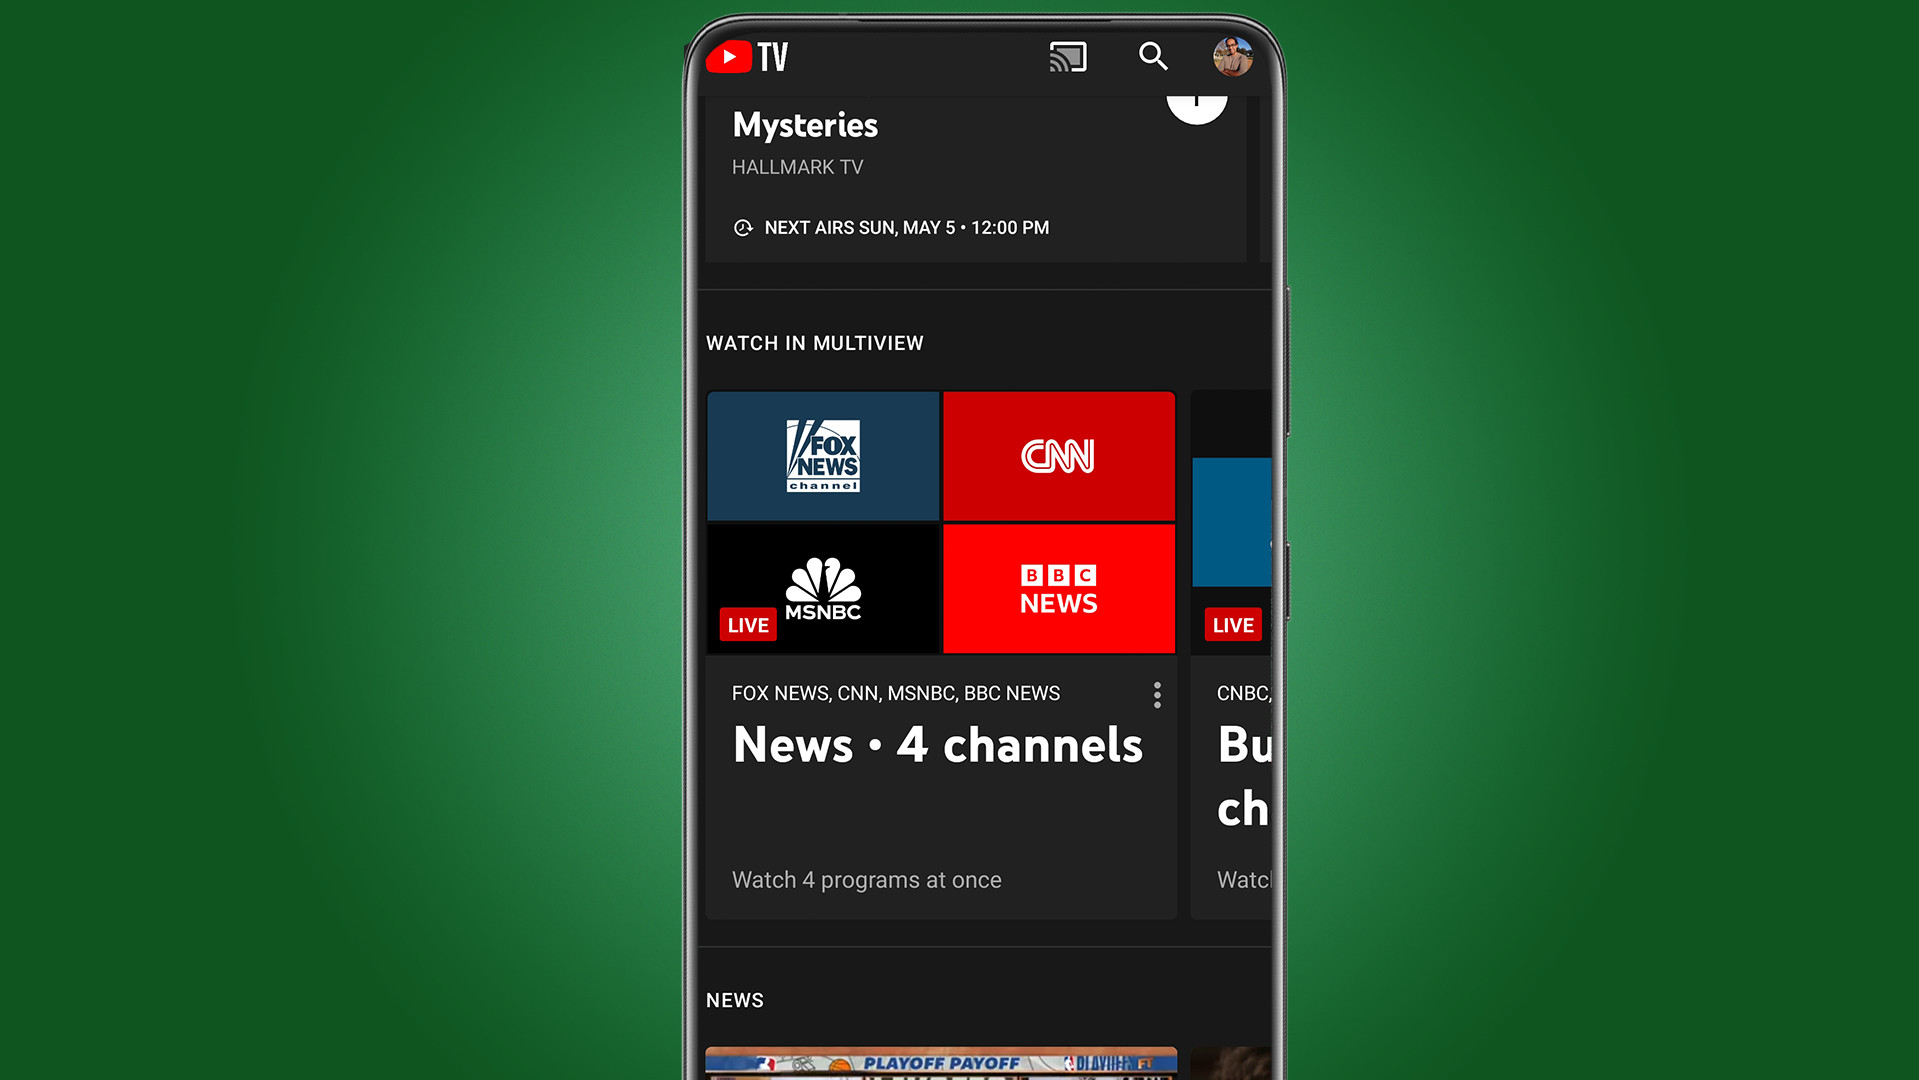 YouTube TV Multiview with News channels